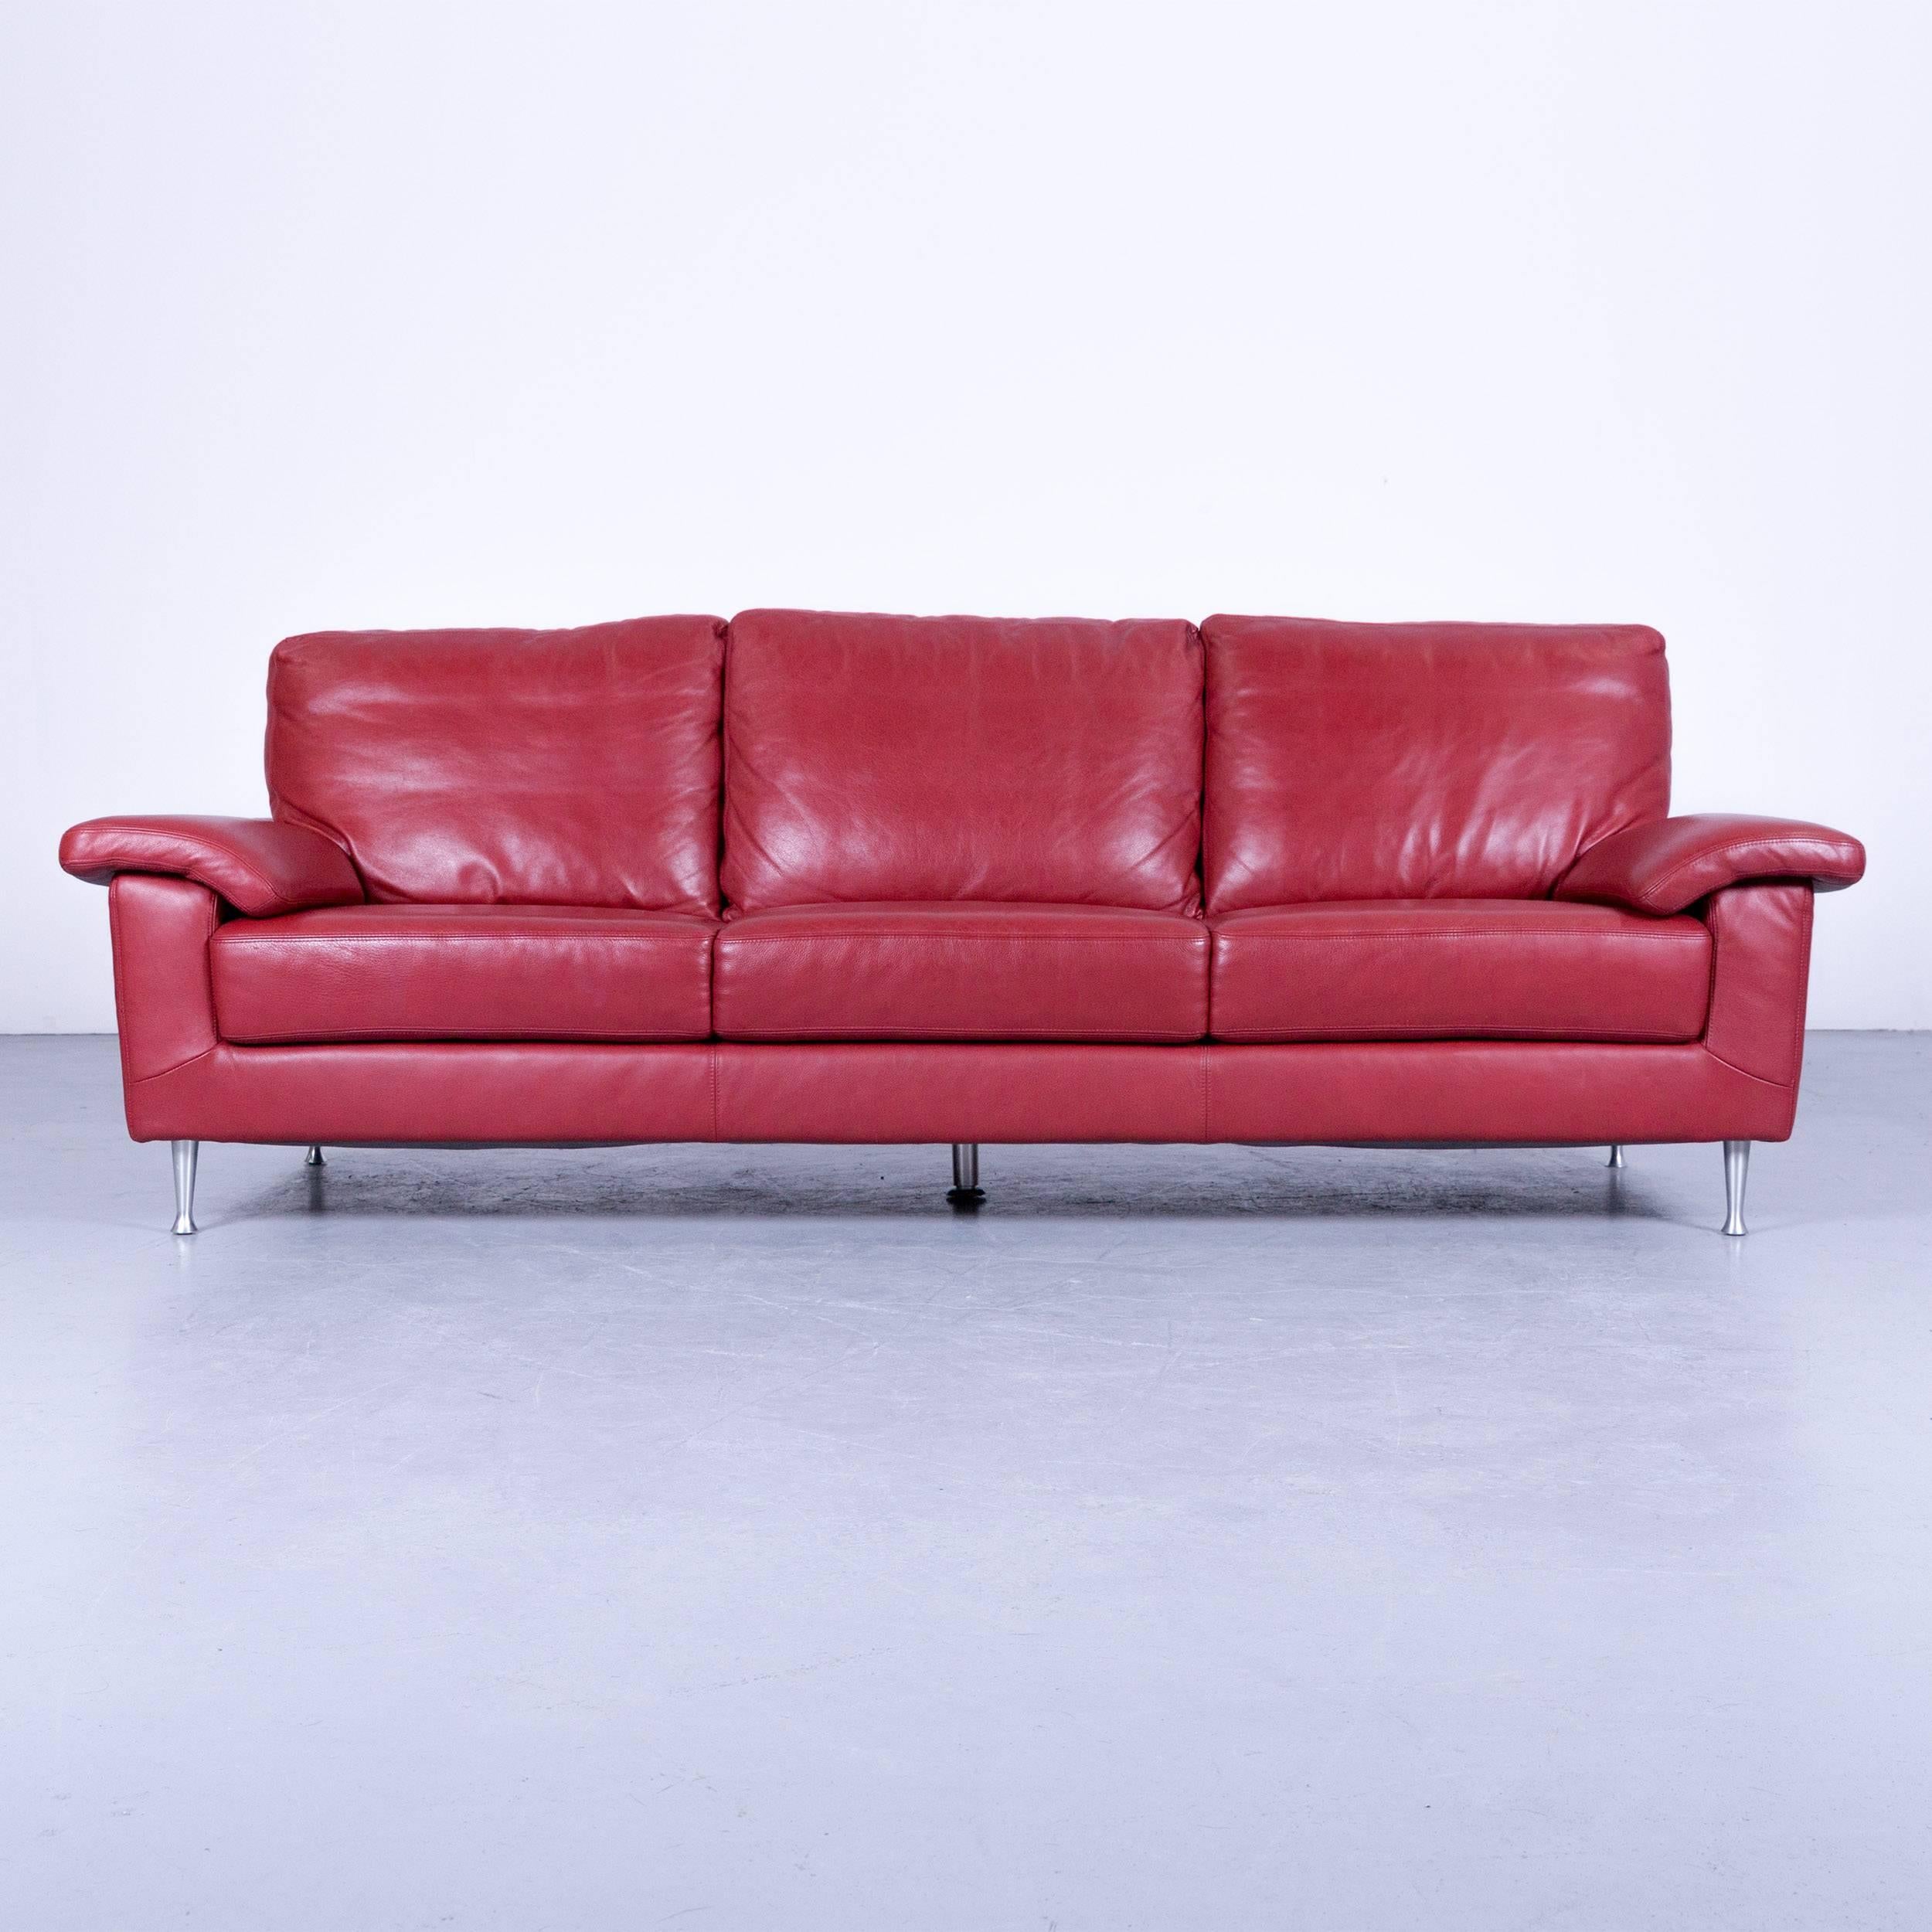 Ewald Schillig designer three-seat sofa with red leather, in a minimalistic and modern design, made for pure comfort and style.